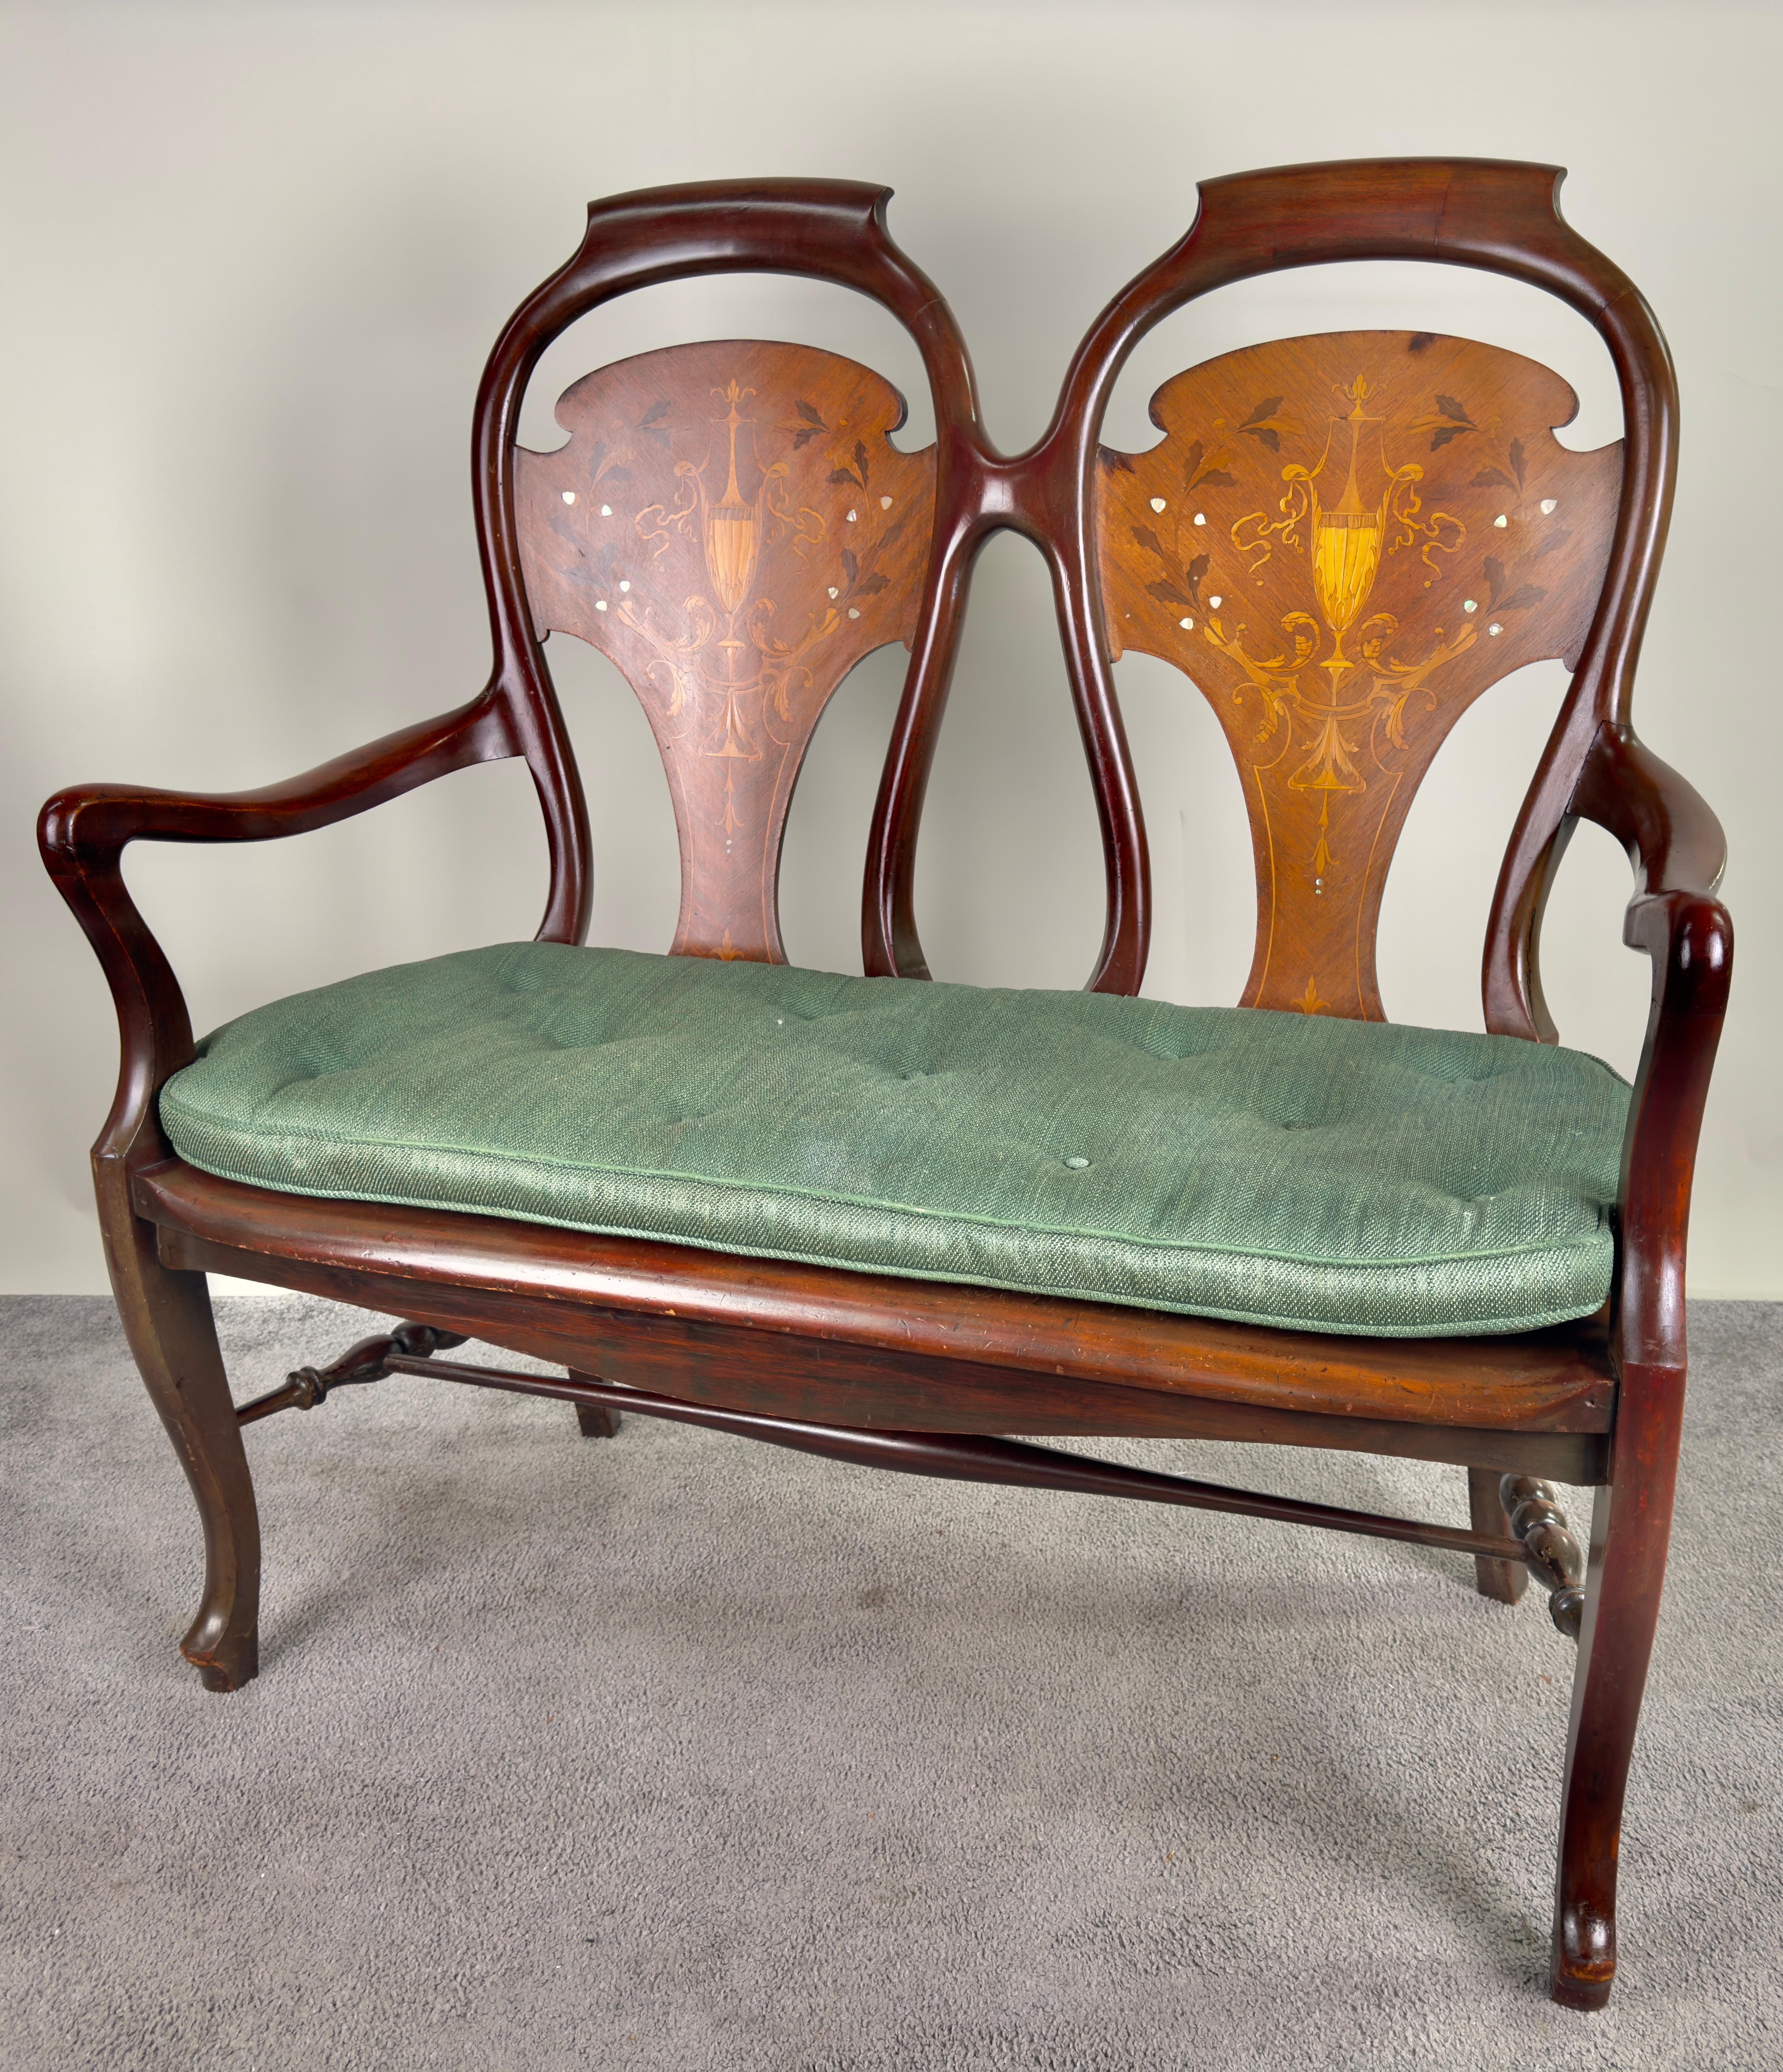 20th Century Queen Anne Style Mahogany & Marquetry inlay Settee or Bench  For Sale